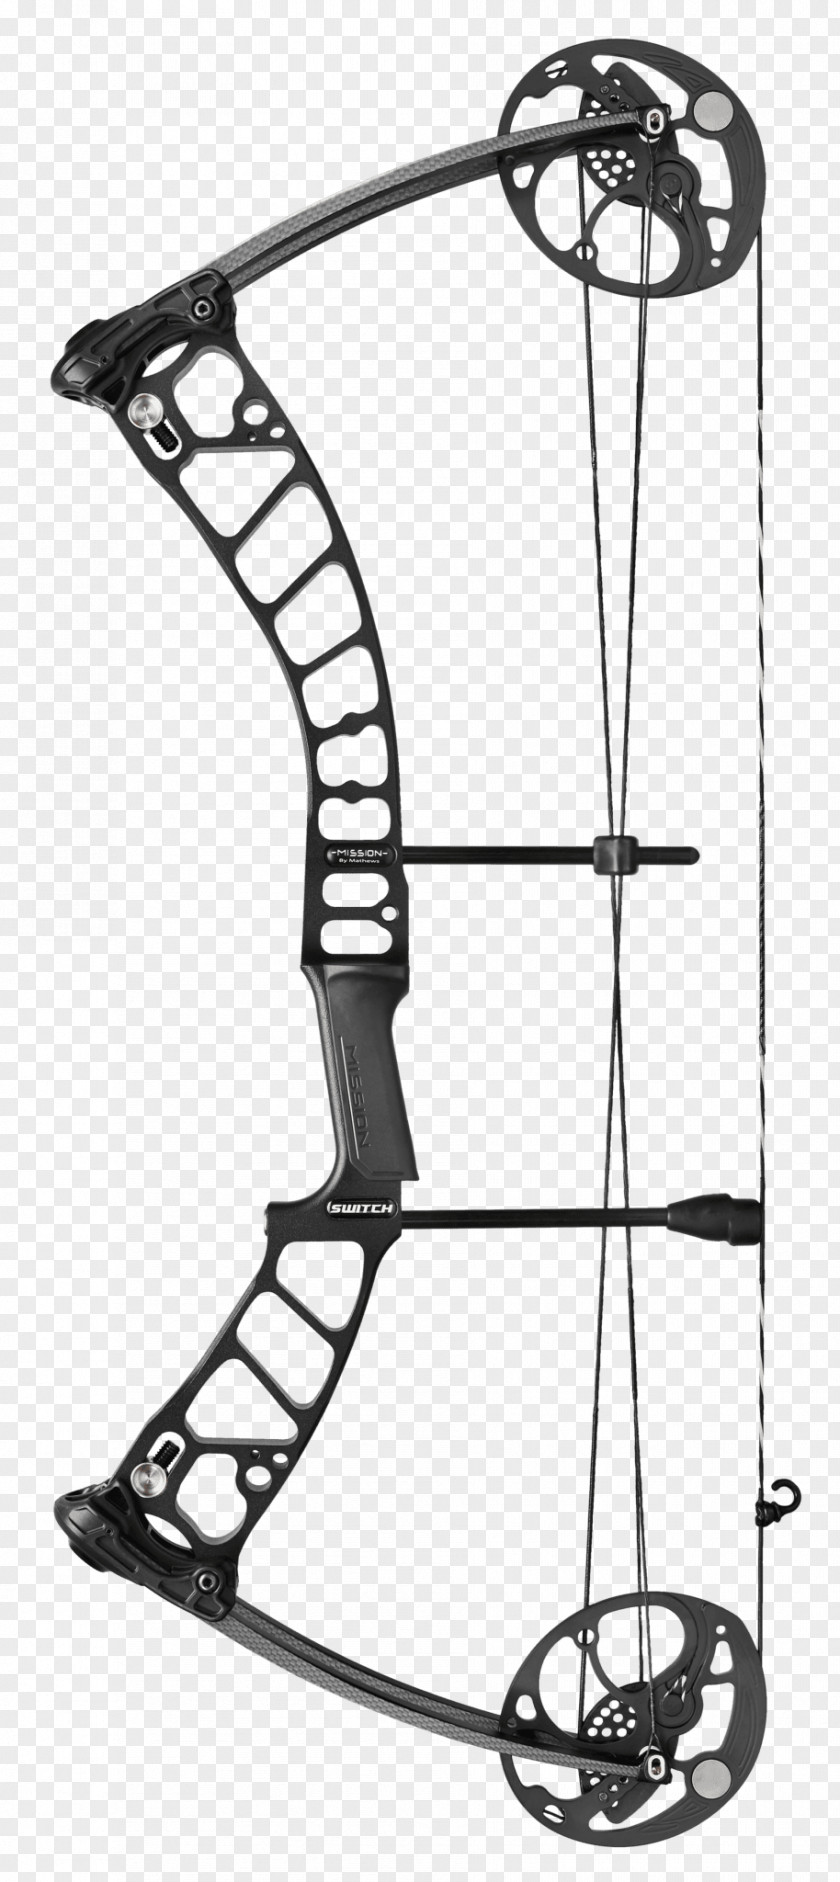 Bow Cold Weapon And Arrow PNG